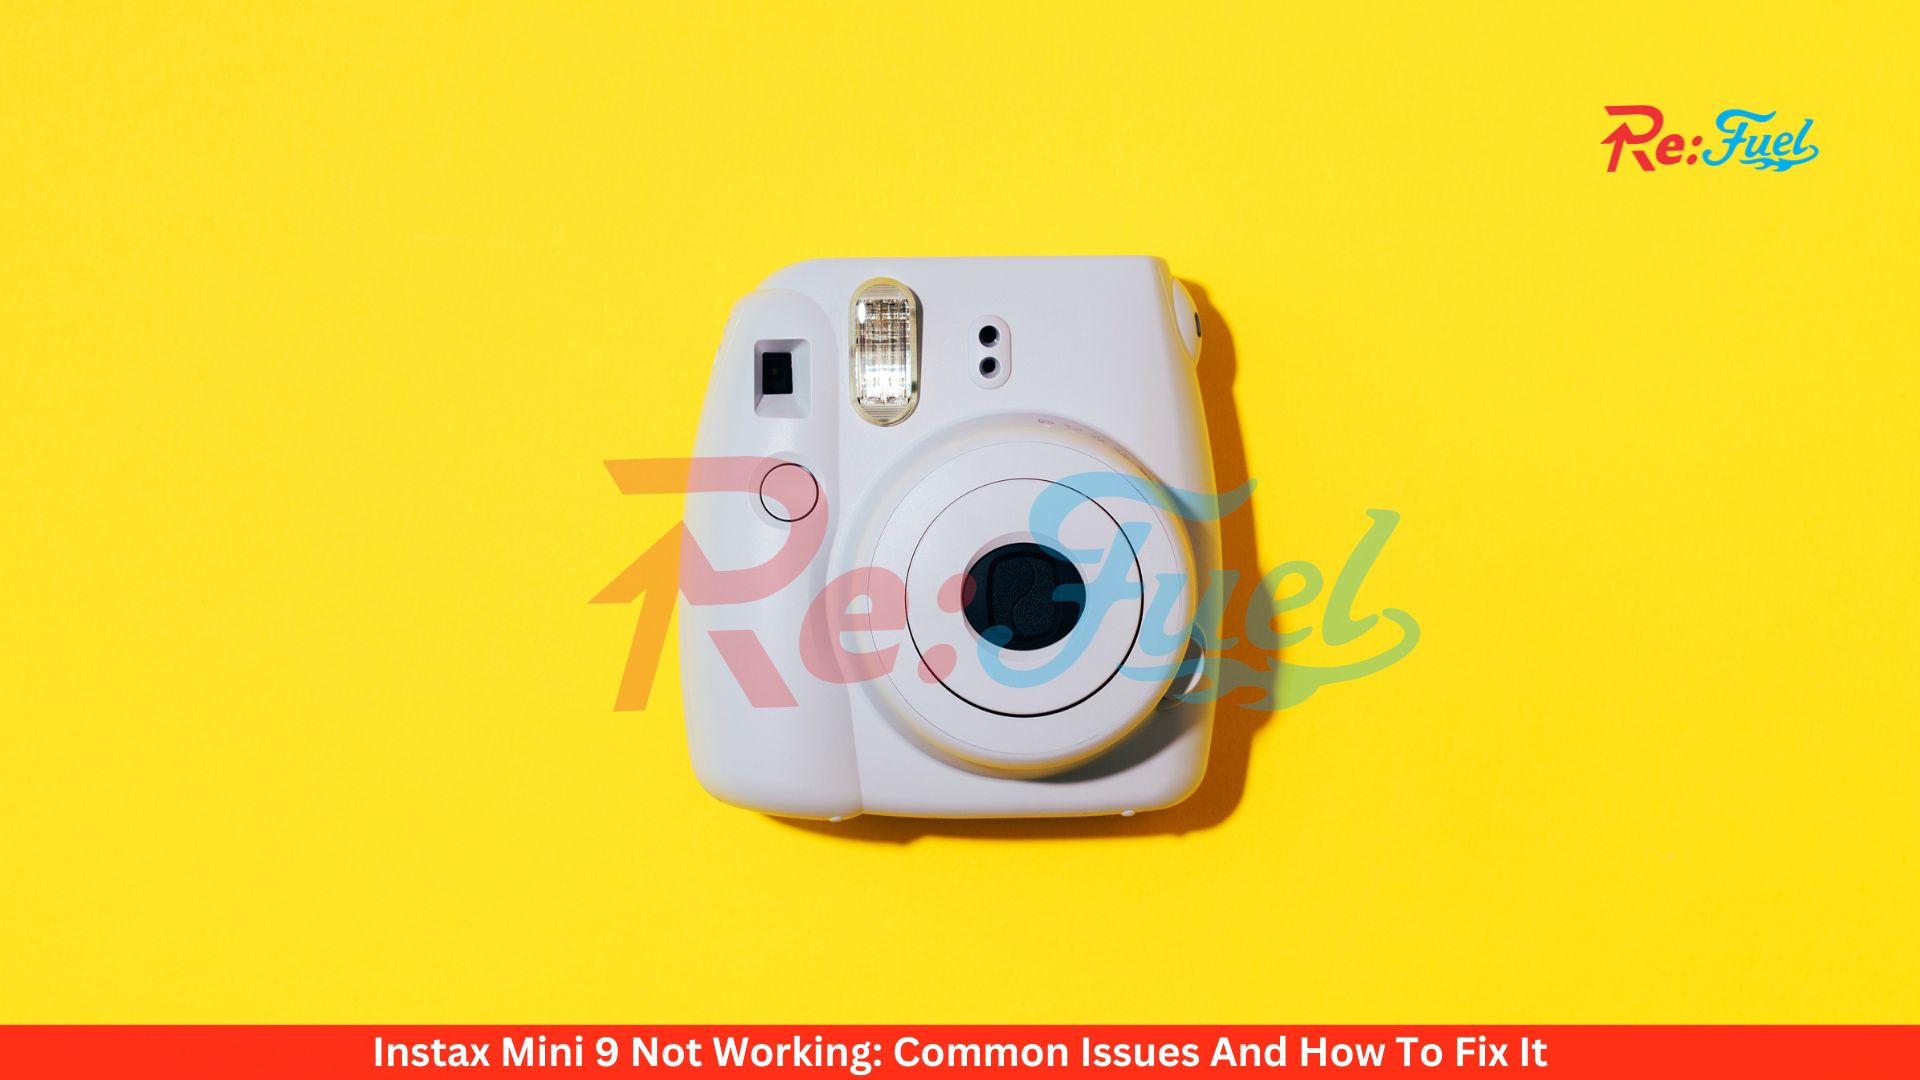 Instax Mini 9 Not Working: Common Issues And How To Fix It